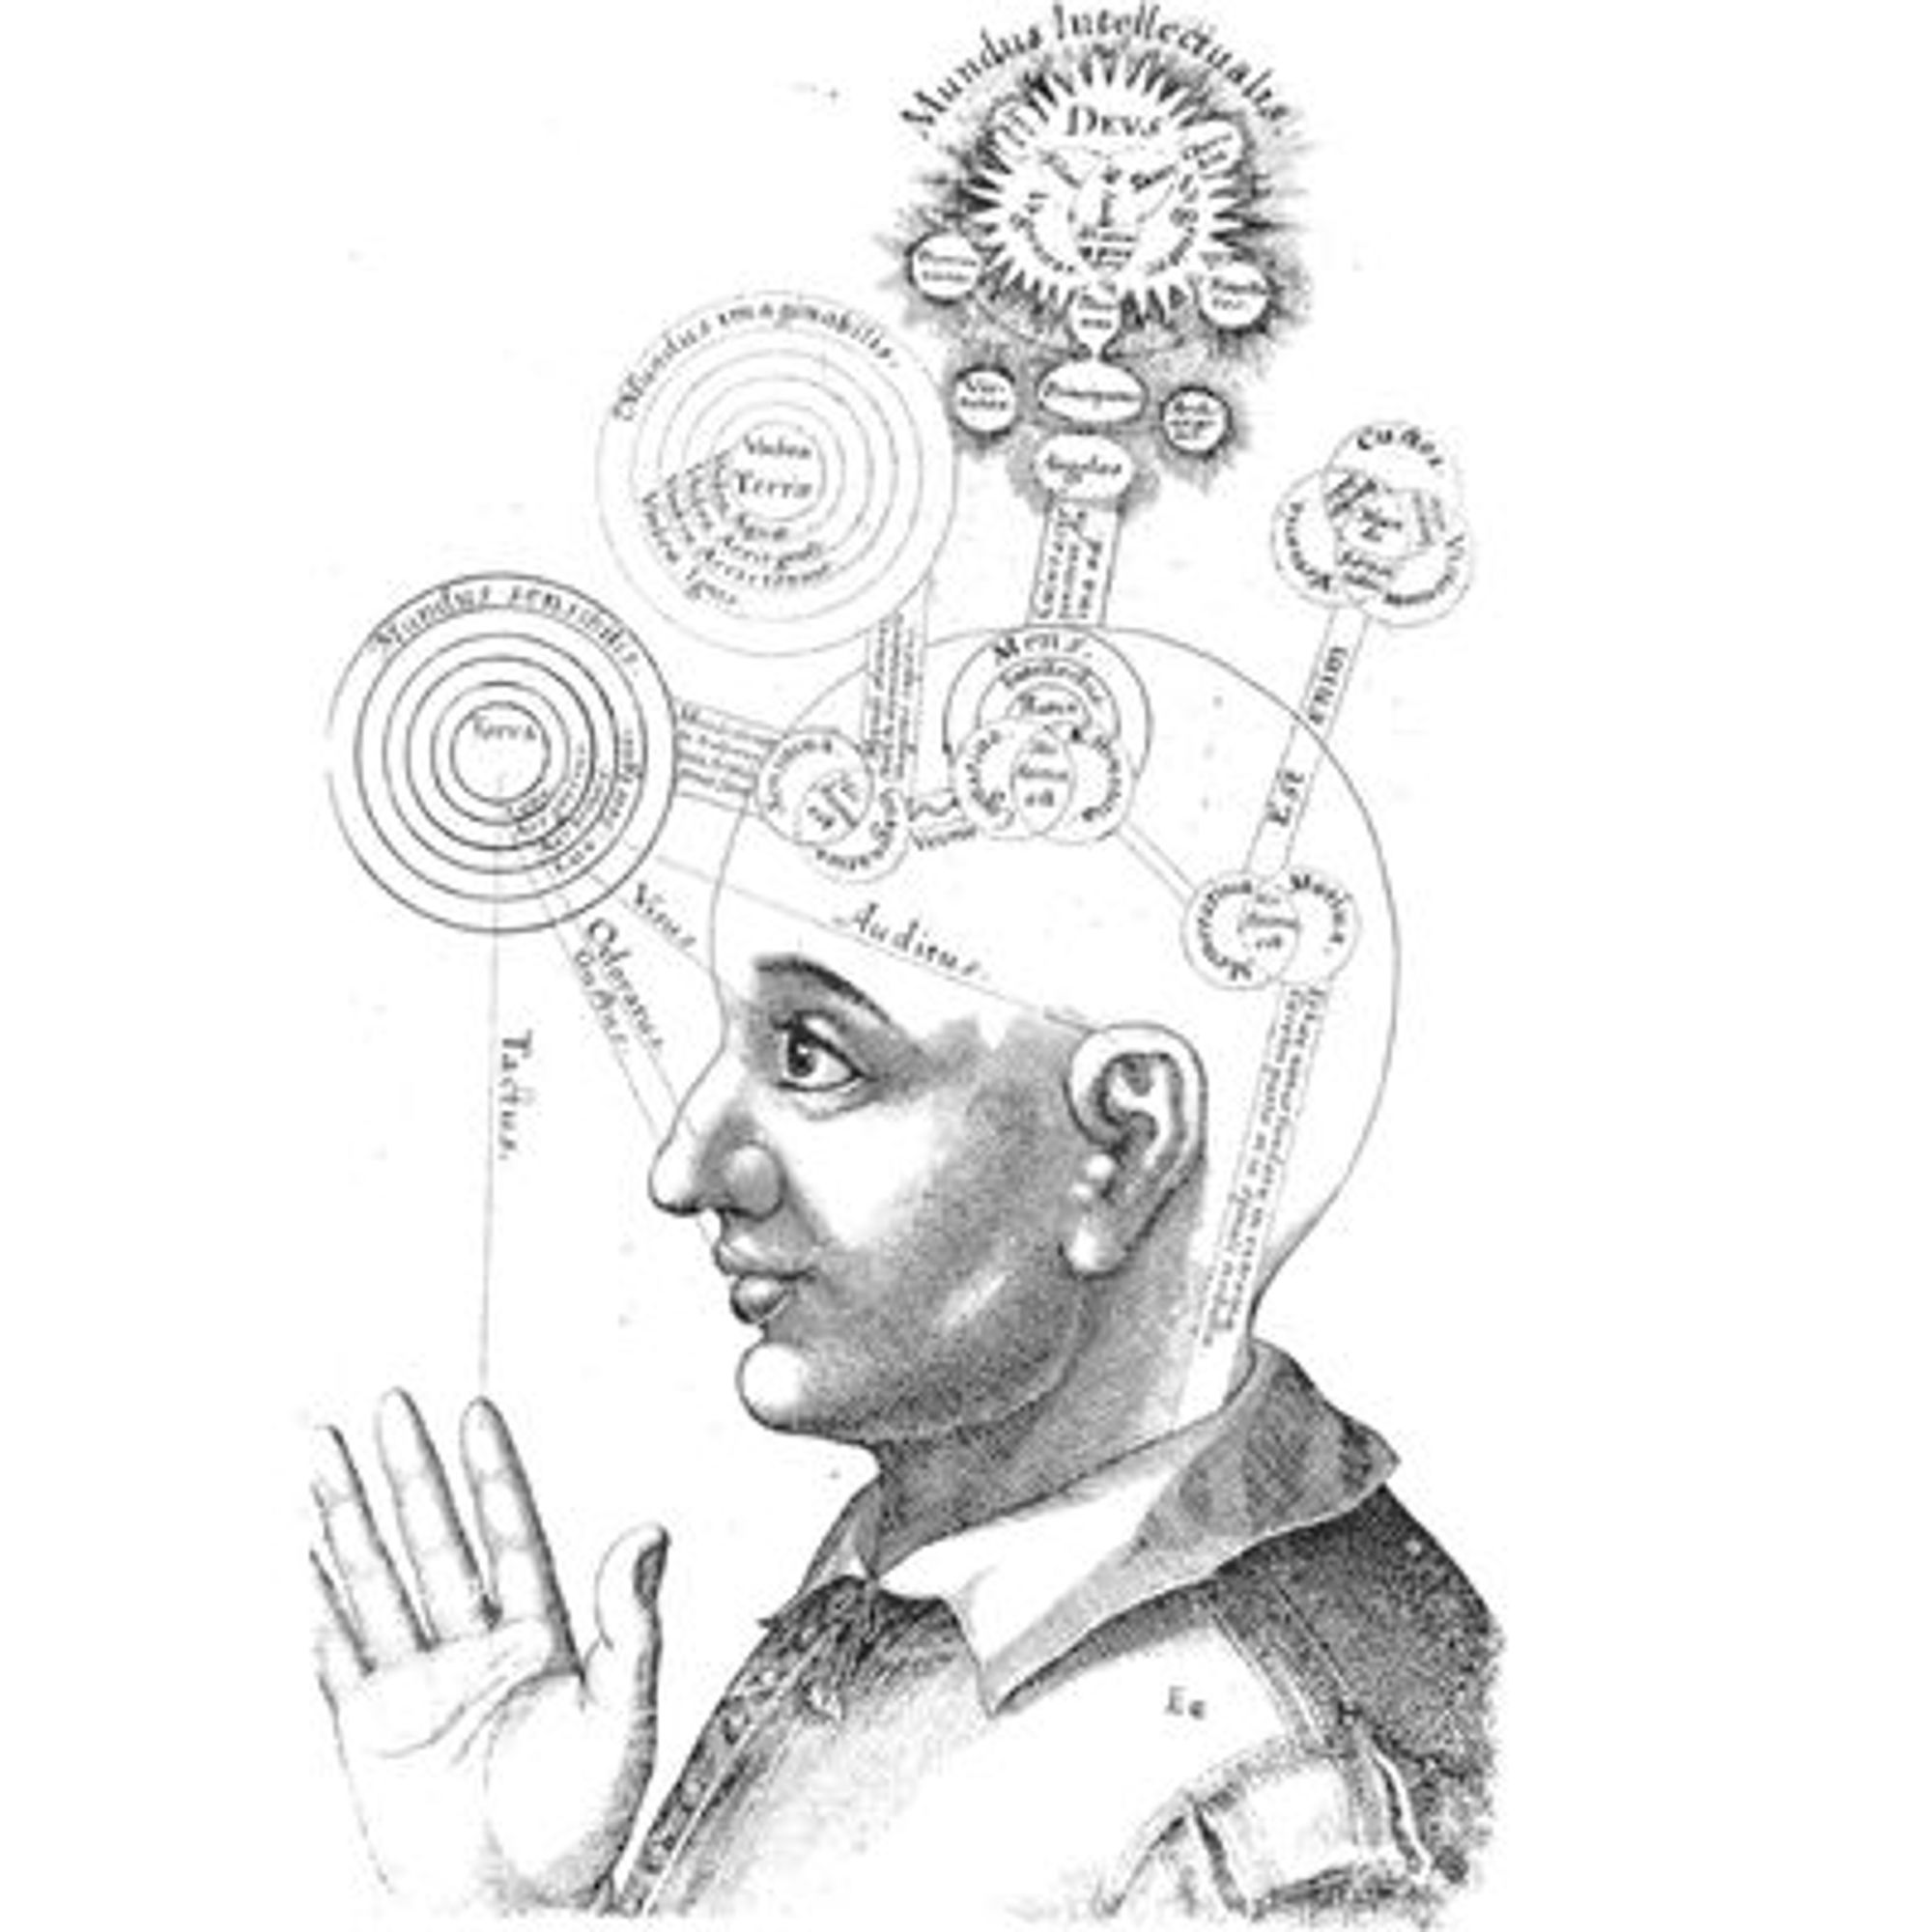 Consciousness, as seen in the 17th century by Robert Fludd, an English physician